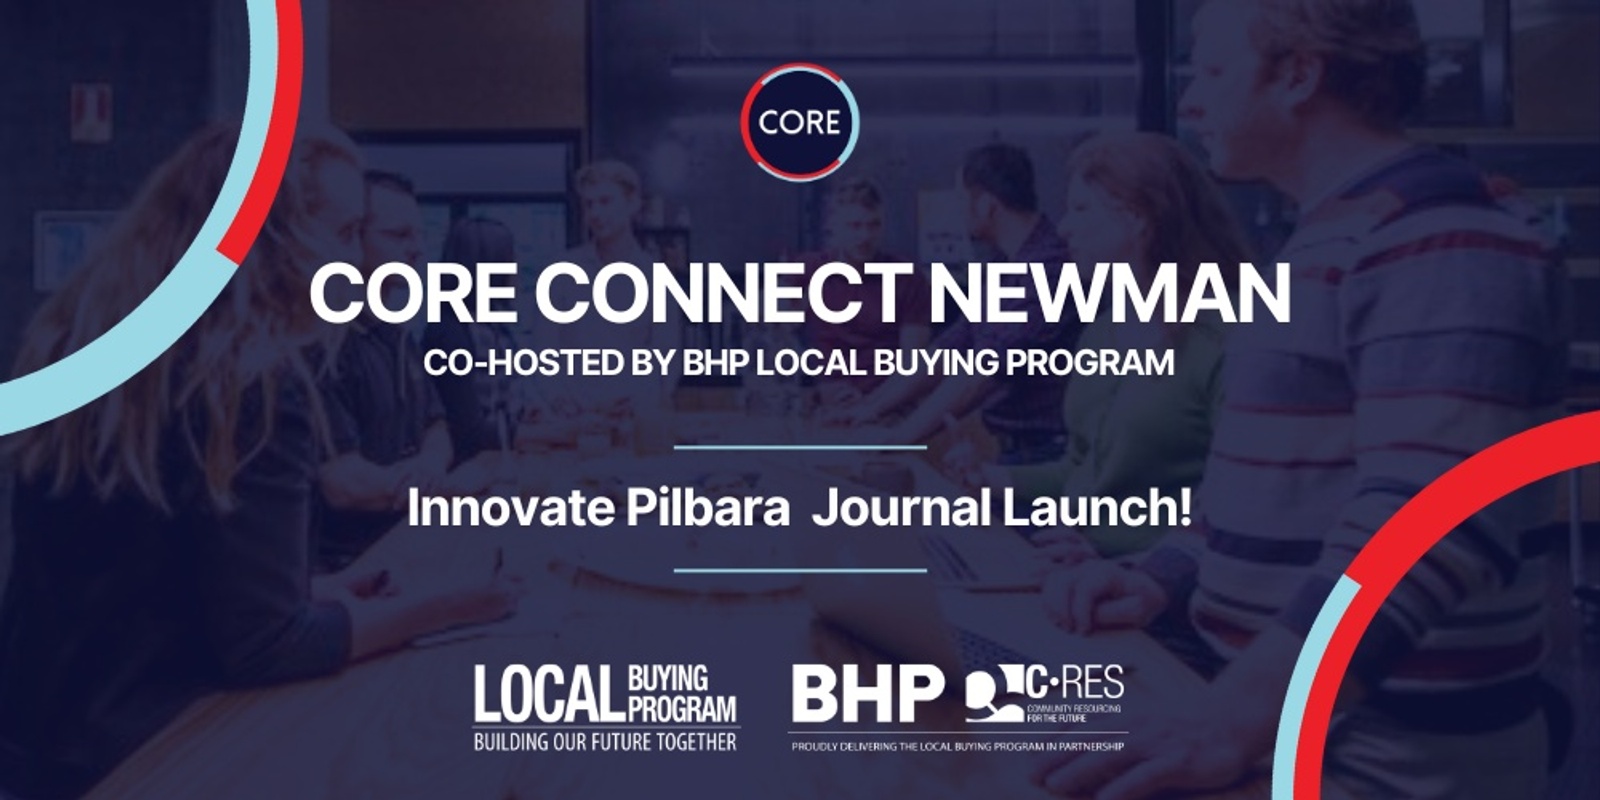 Banner image for CORE Connect Newman in partnership with BHP Local Buying Program